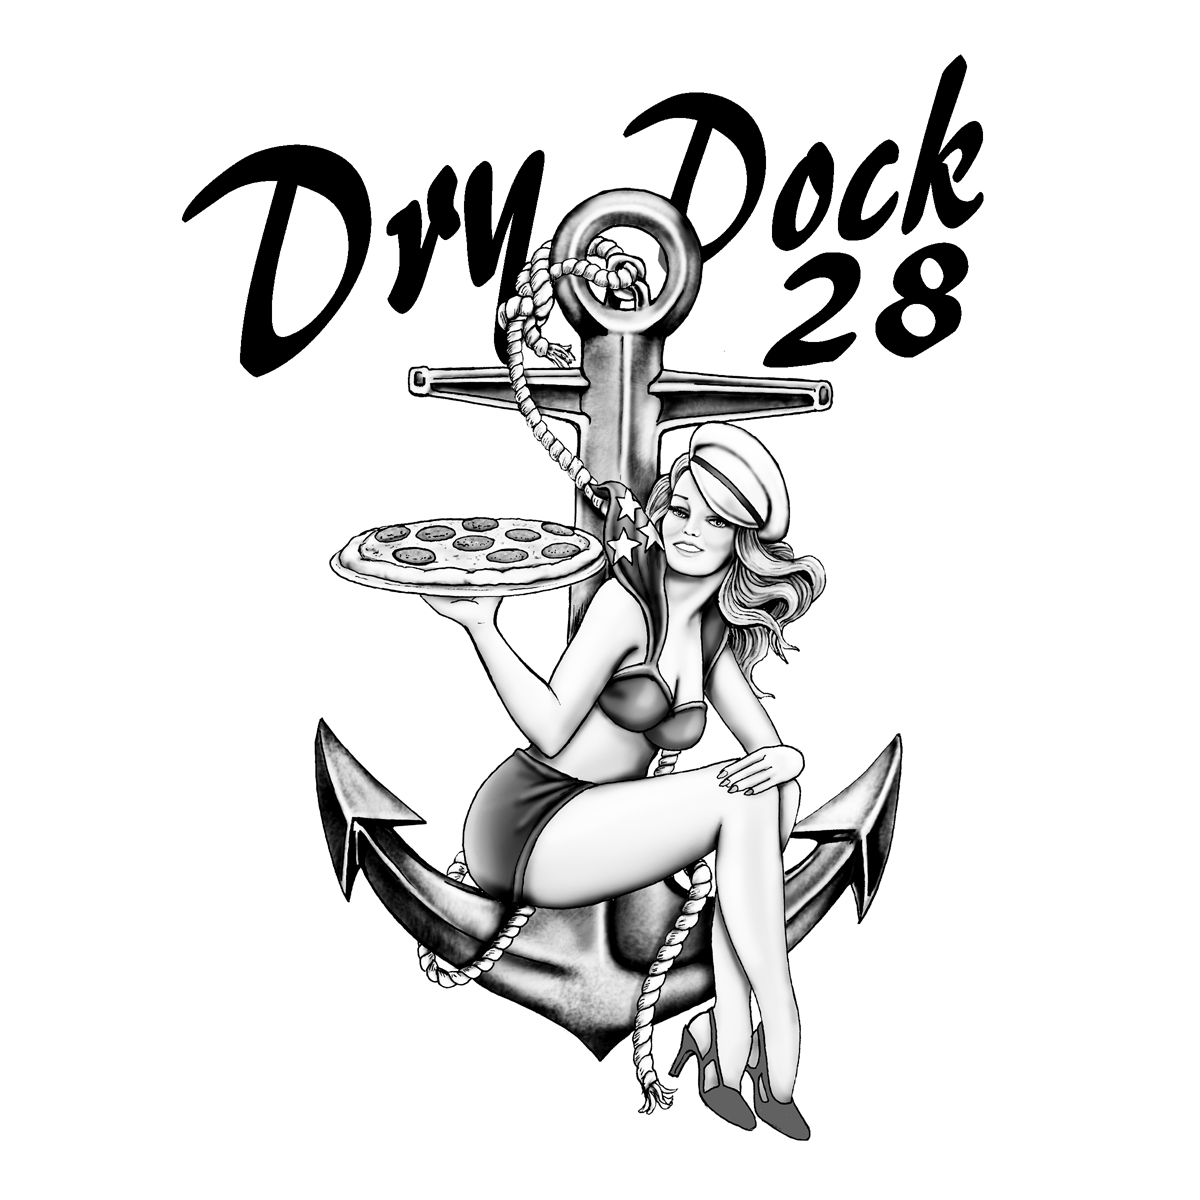 Dry Dock 28 sailor pin up girl on anchor BREAST copy